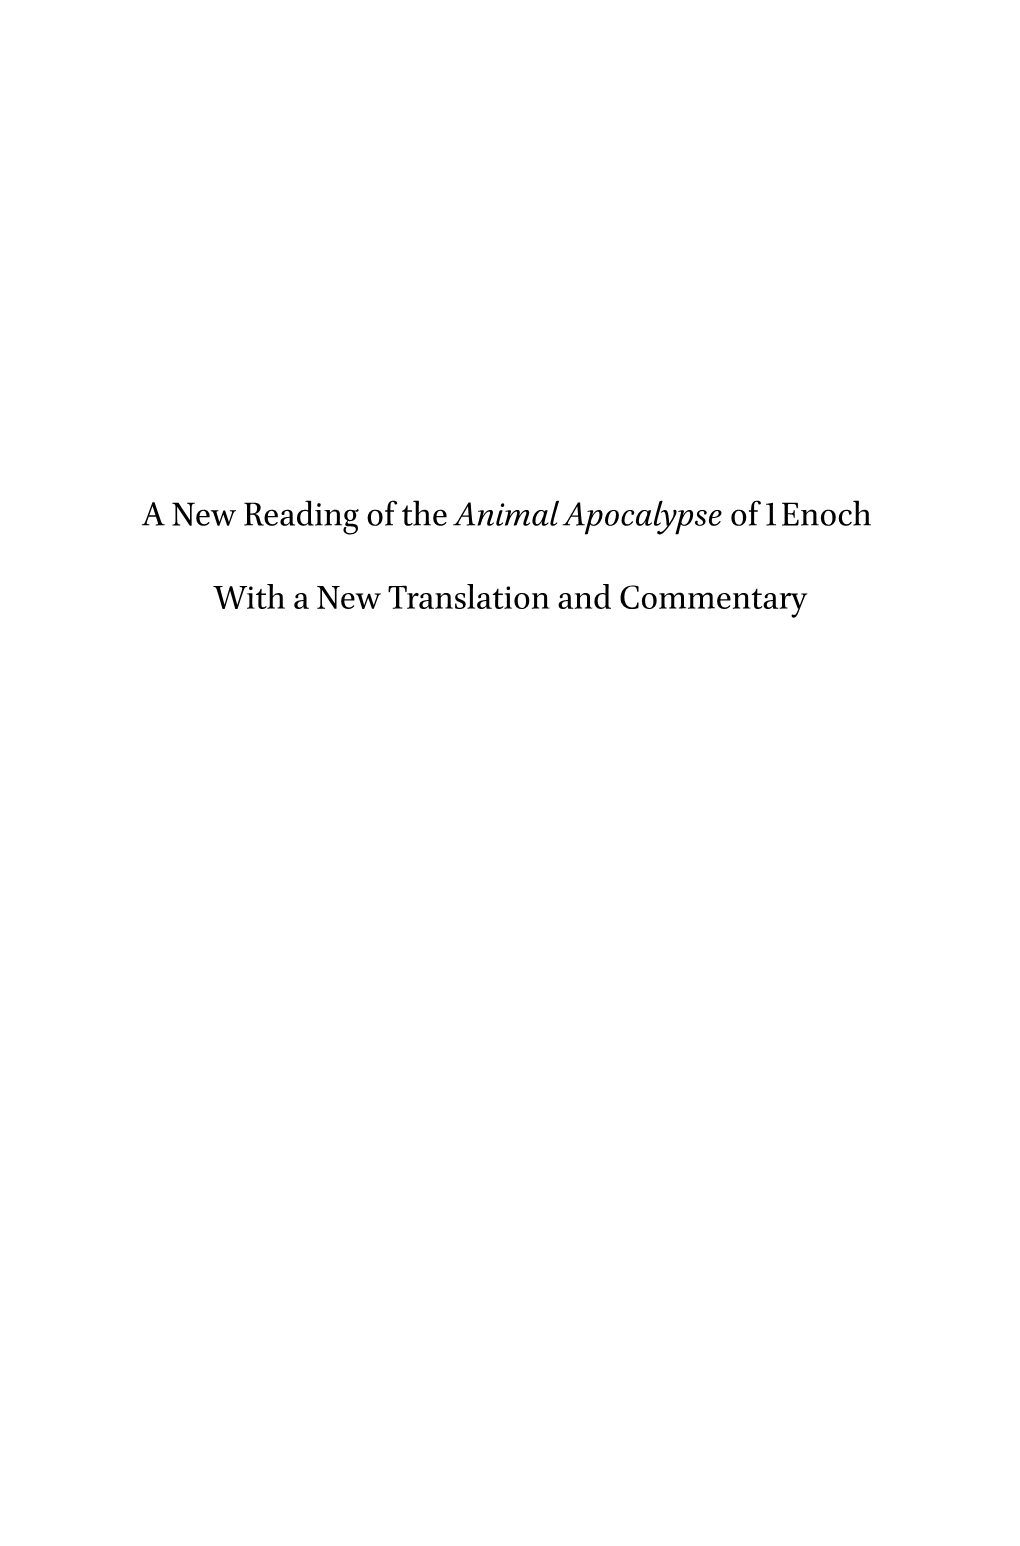 A New Reading of the Animalapocalypse of 1Enoch with a New